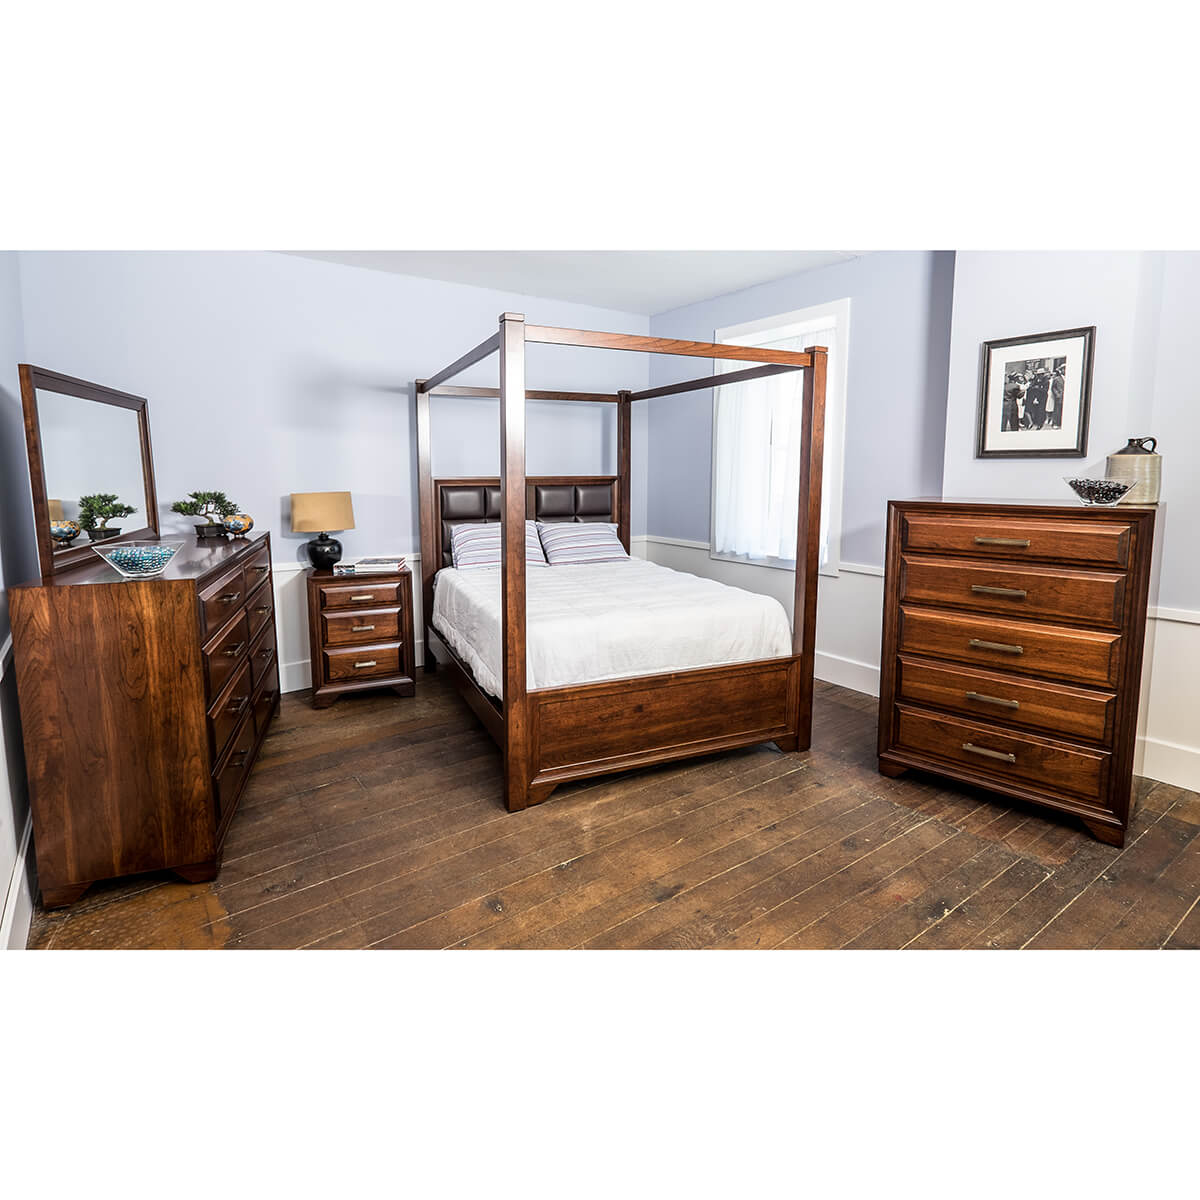 Read more about the article Grand River Bedroom Collection